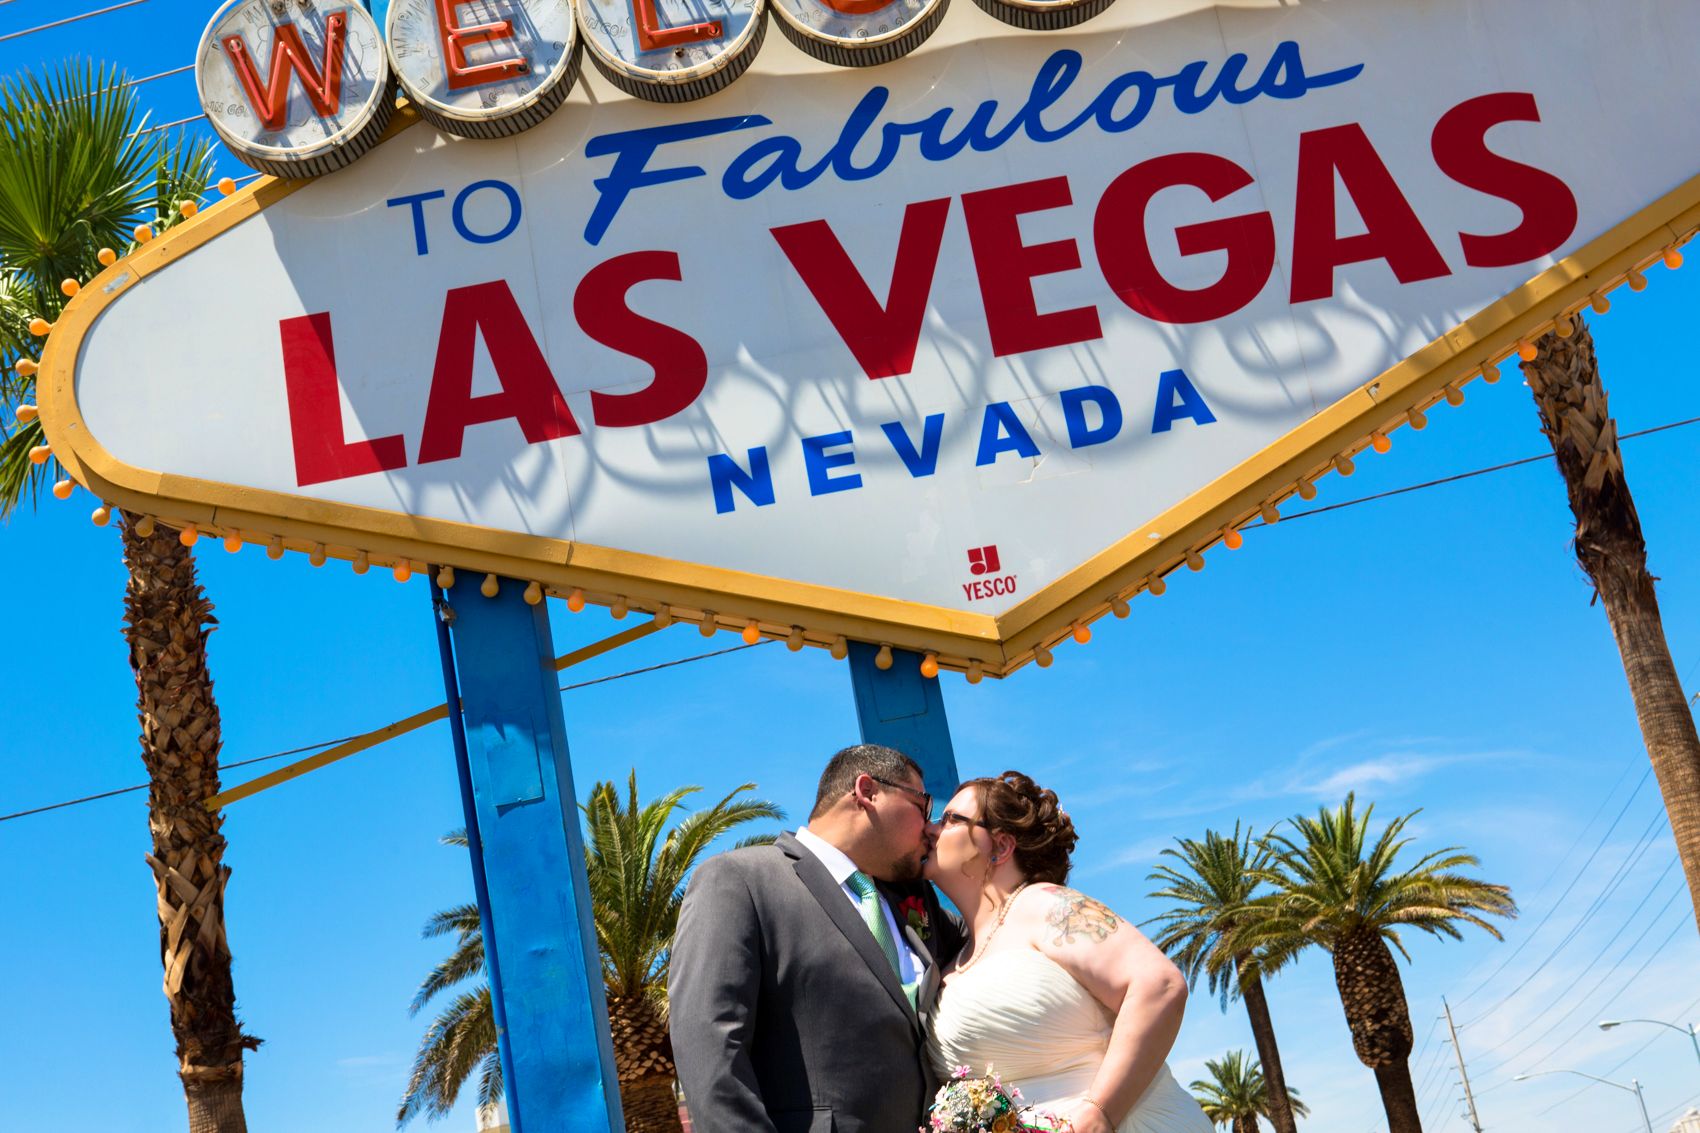 Las Vegas to offer a pop-up marriage license office at the airport